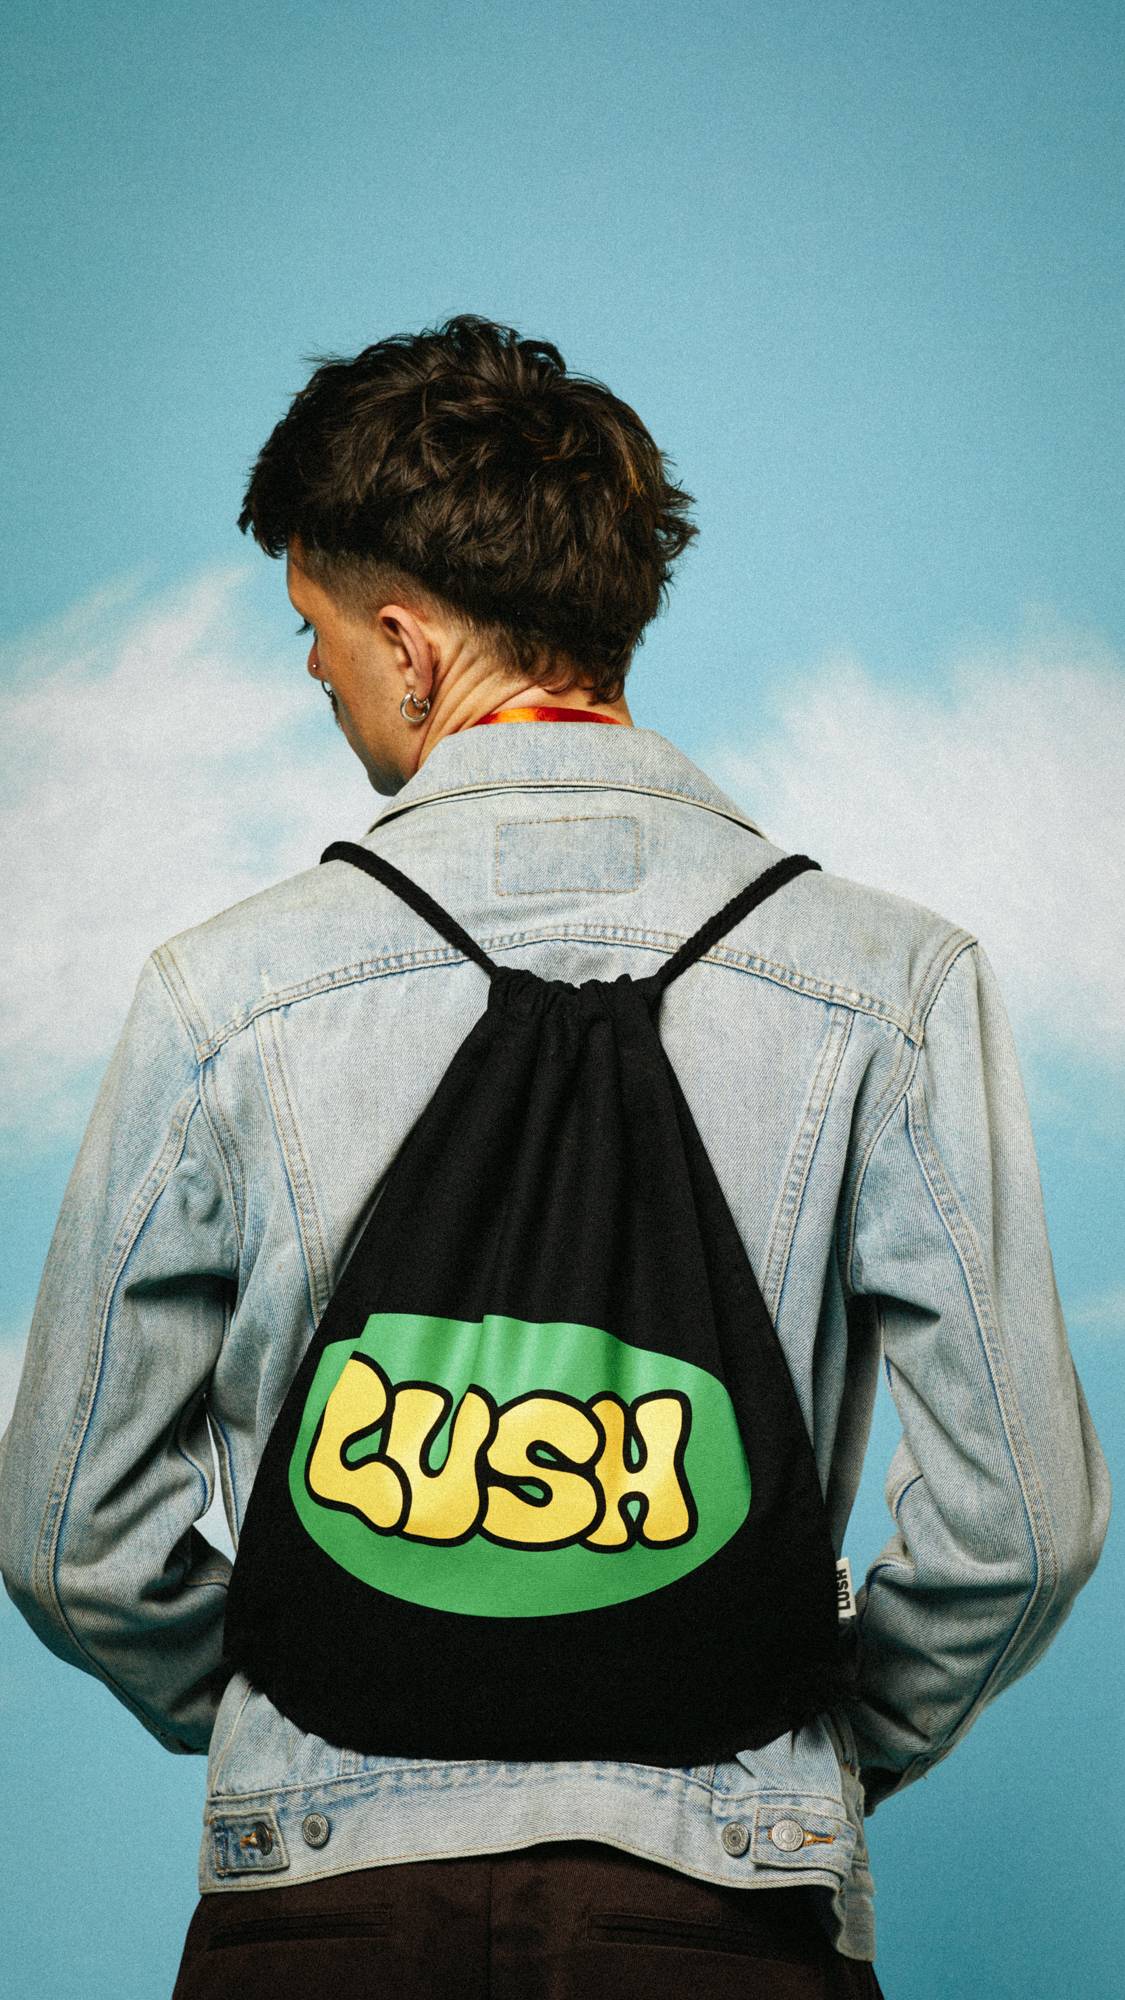 Image shows the model facing away, wearing a denim jacket as they wear the Retro Bubble drawstring bag on their back.